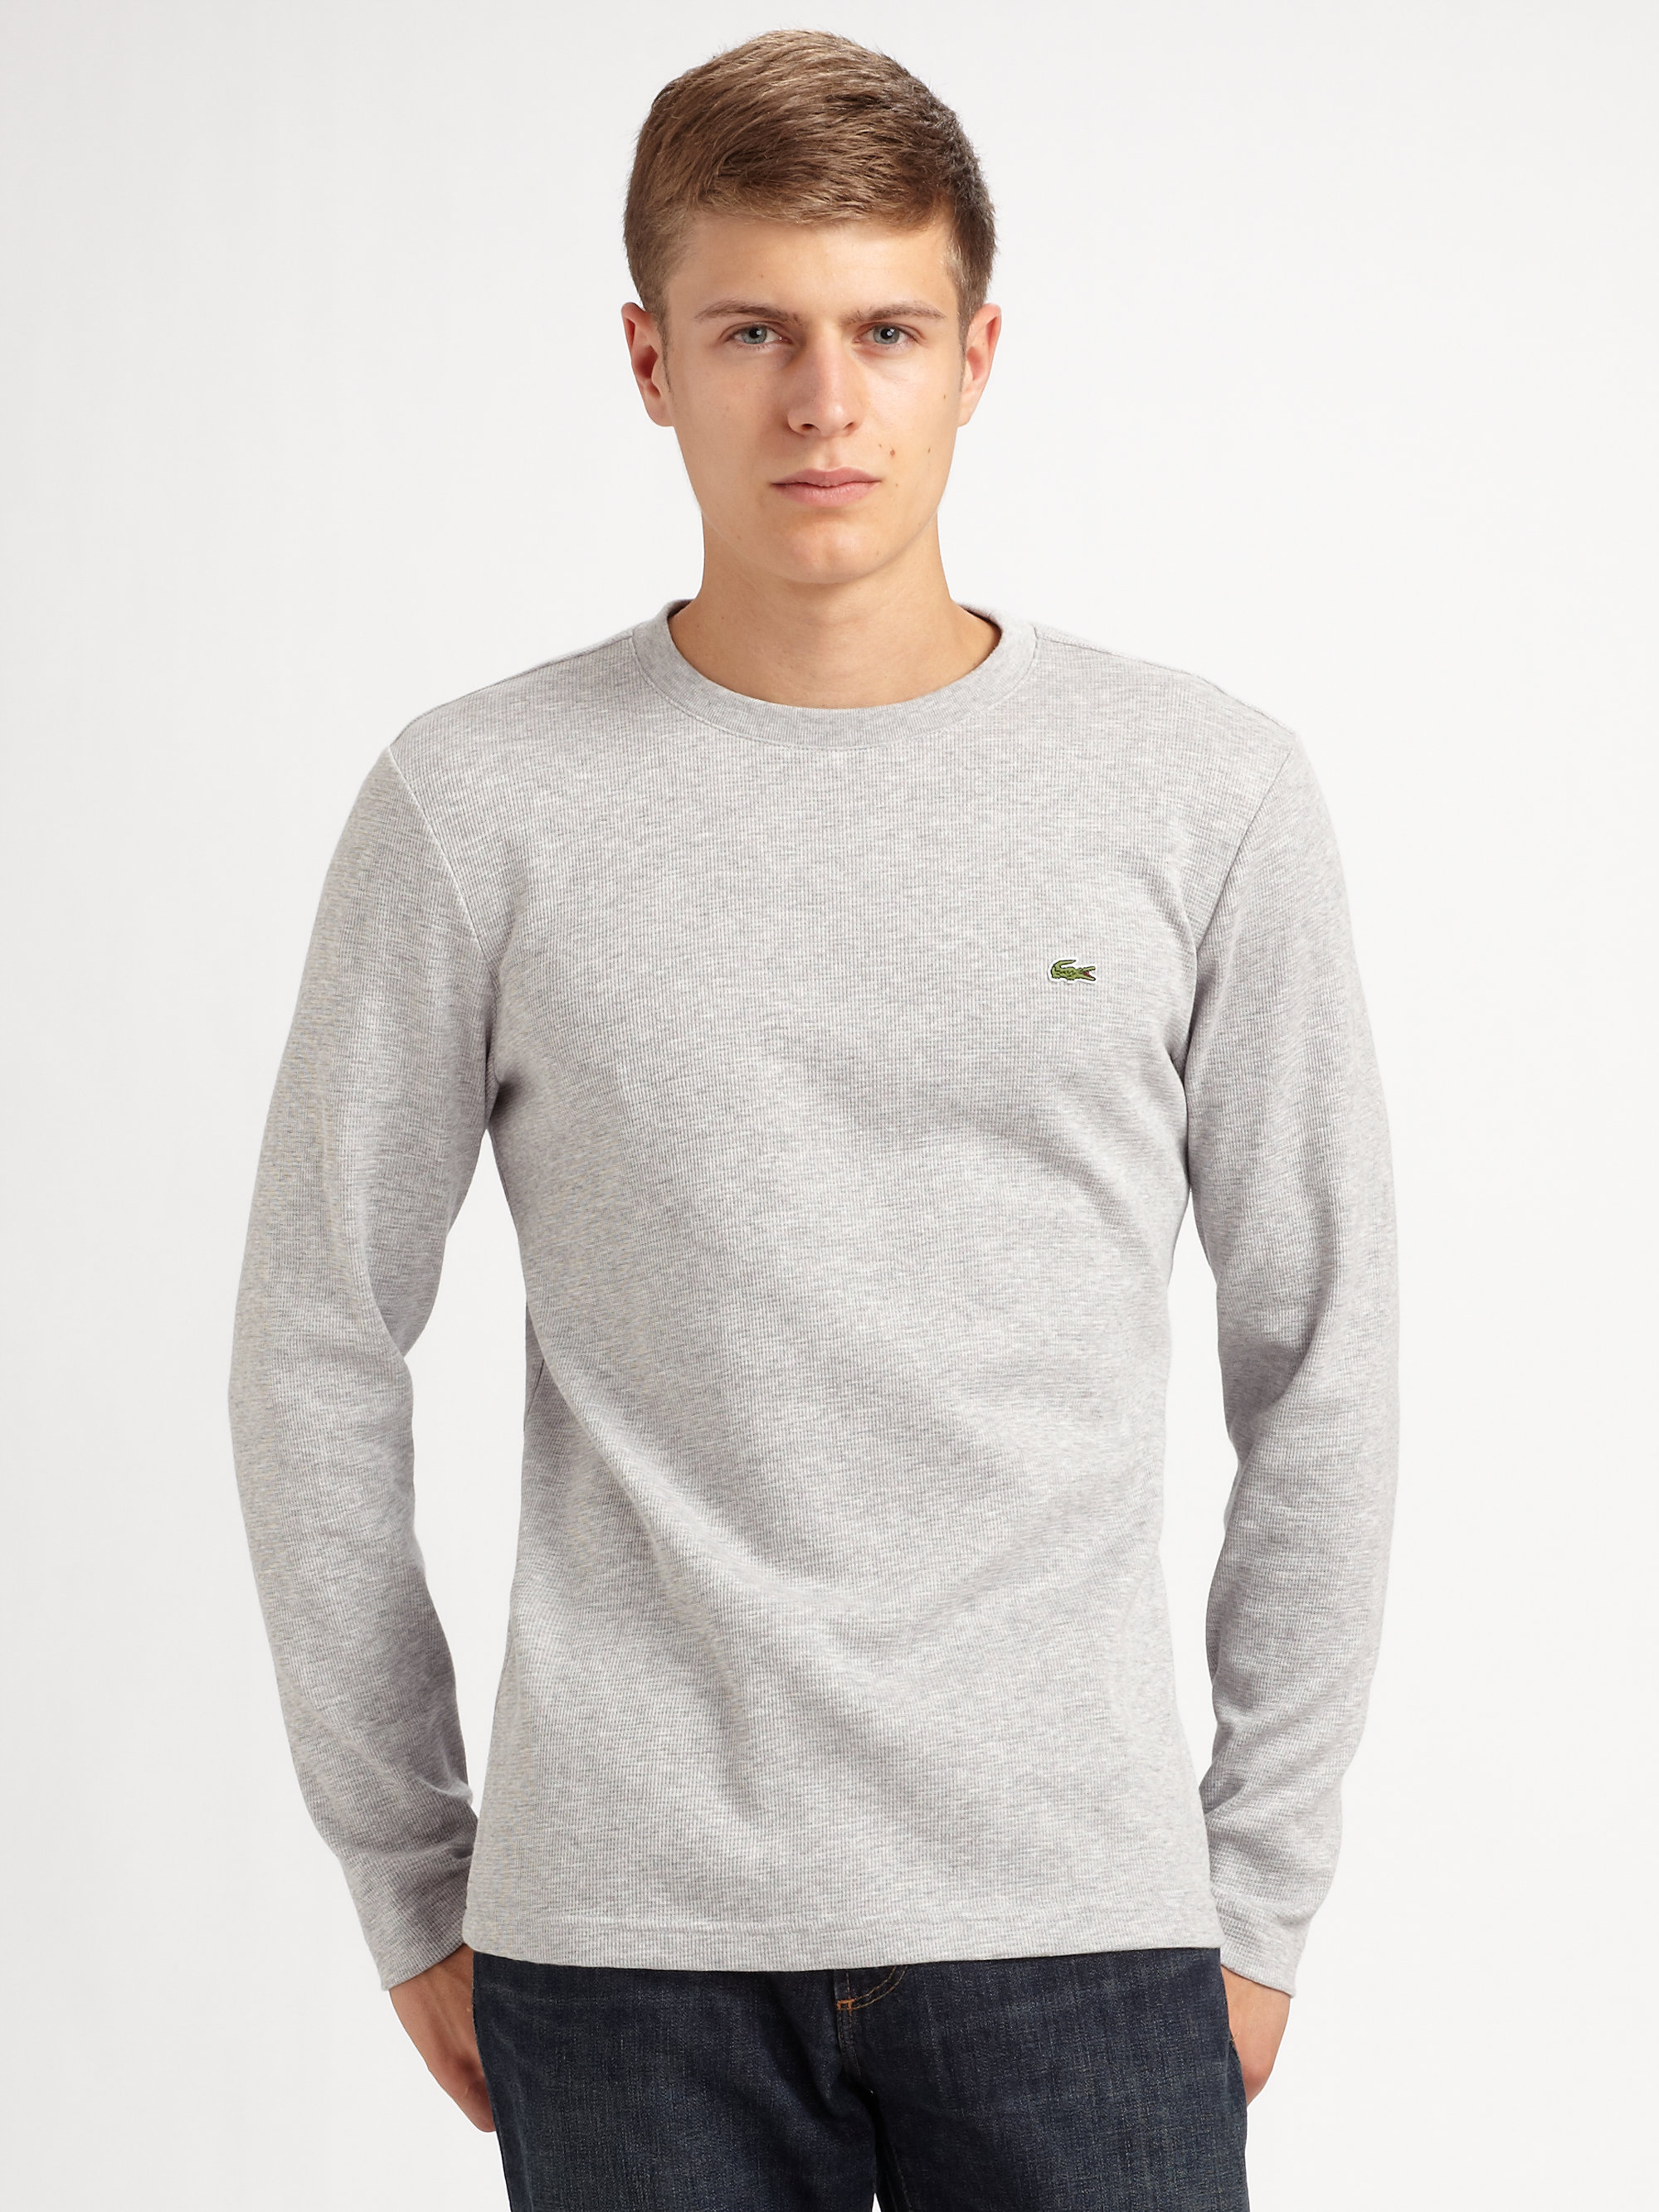 Lacoste Thermal Tee in Grey (Gray) for 